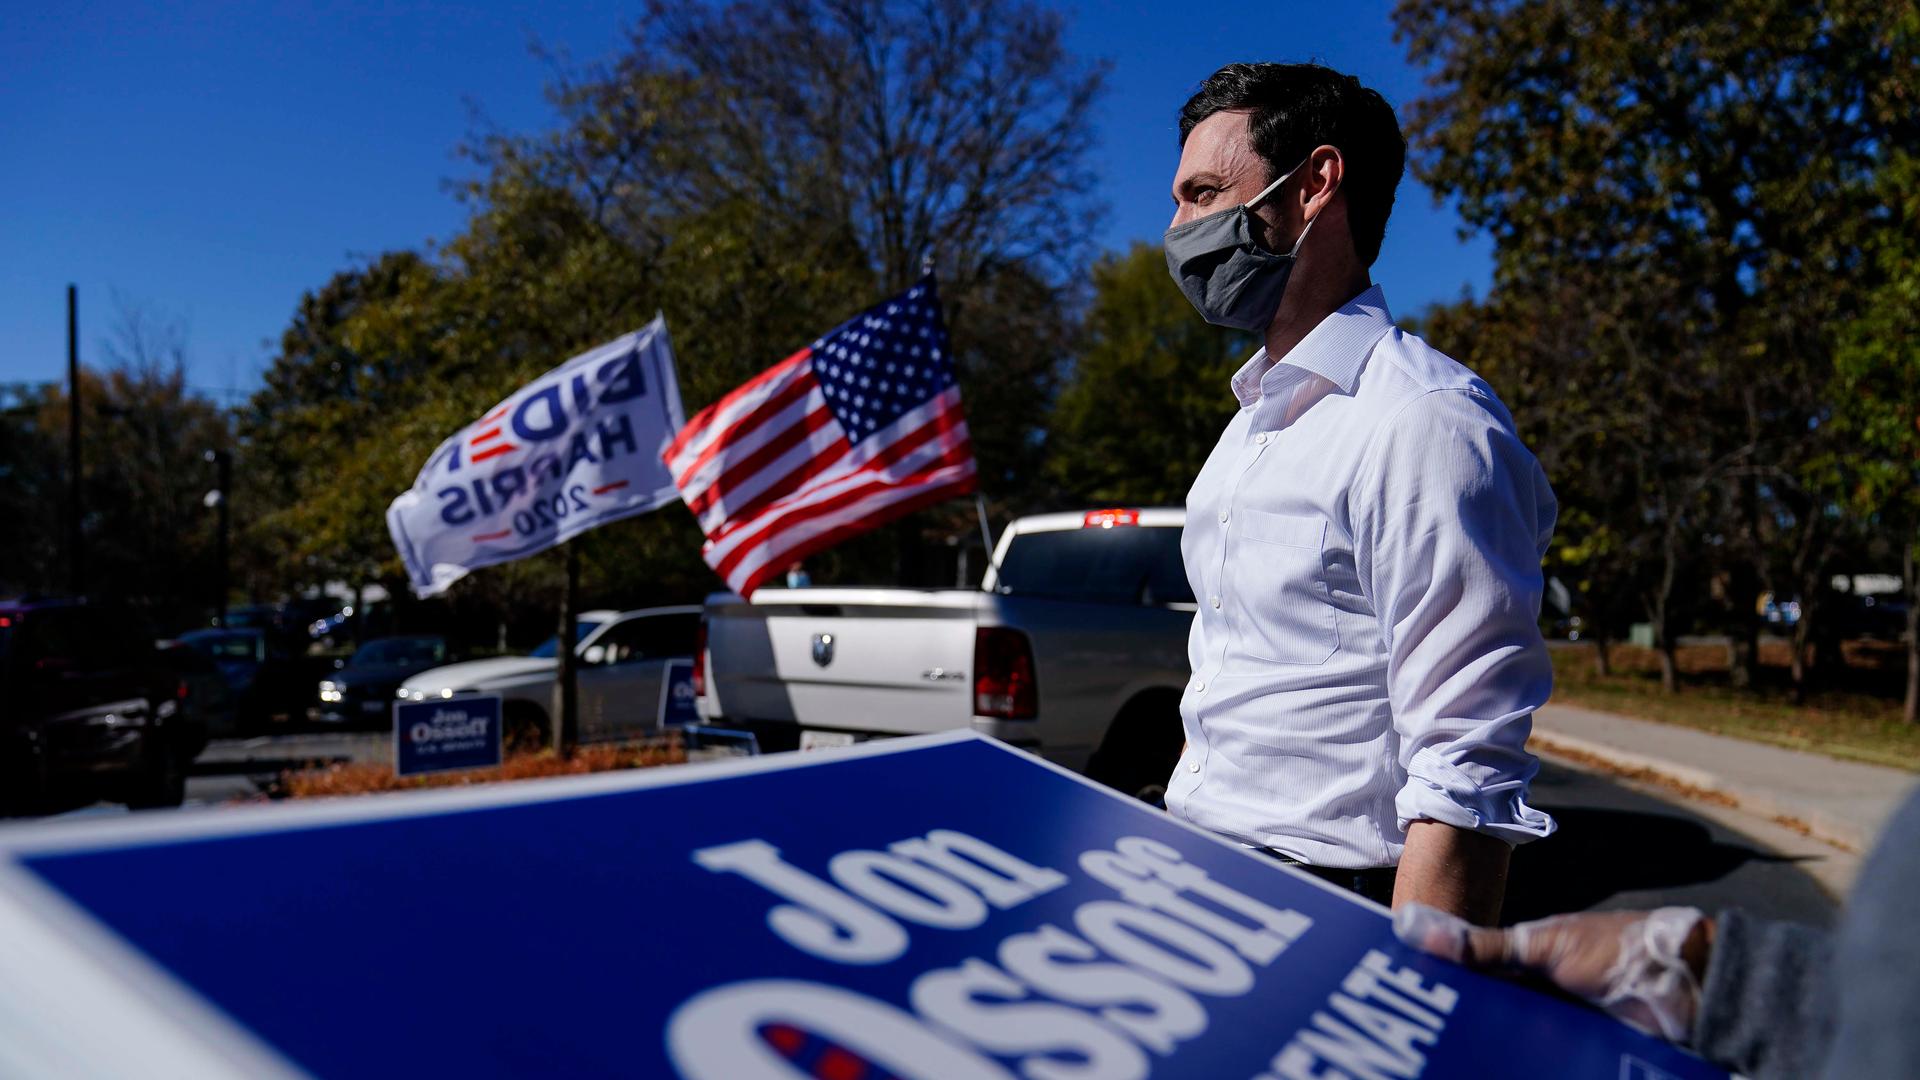 Georgia Democratic candidate for US Senate Jon Ossoff waits for a supporter to arrive during a drive-through yard sign pick-up event on Nov. 18, 2020, in Marietta, Georgia.